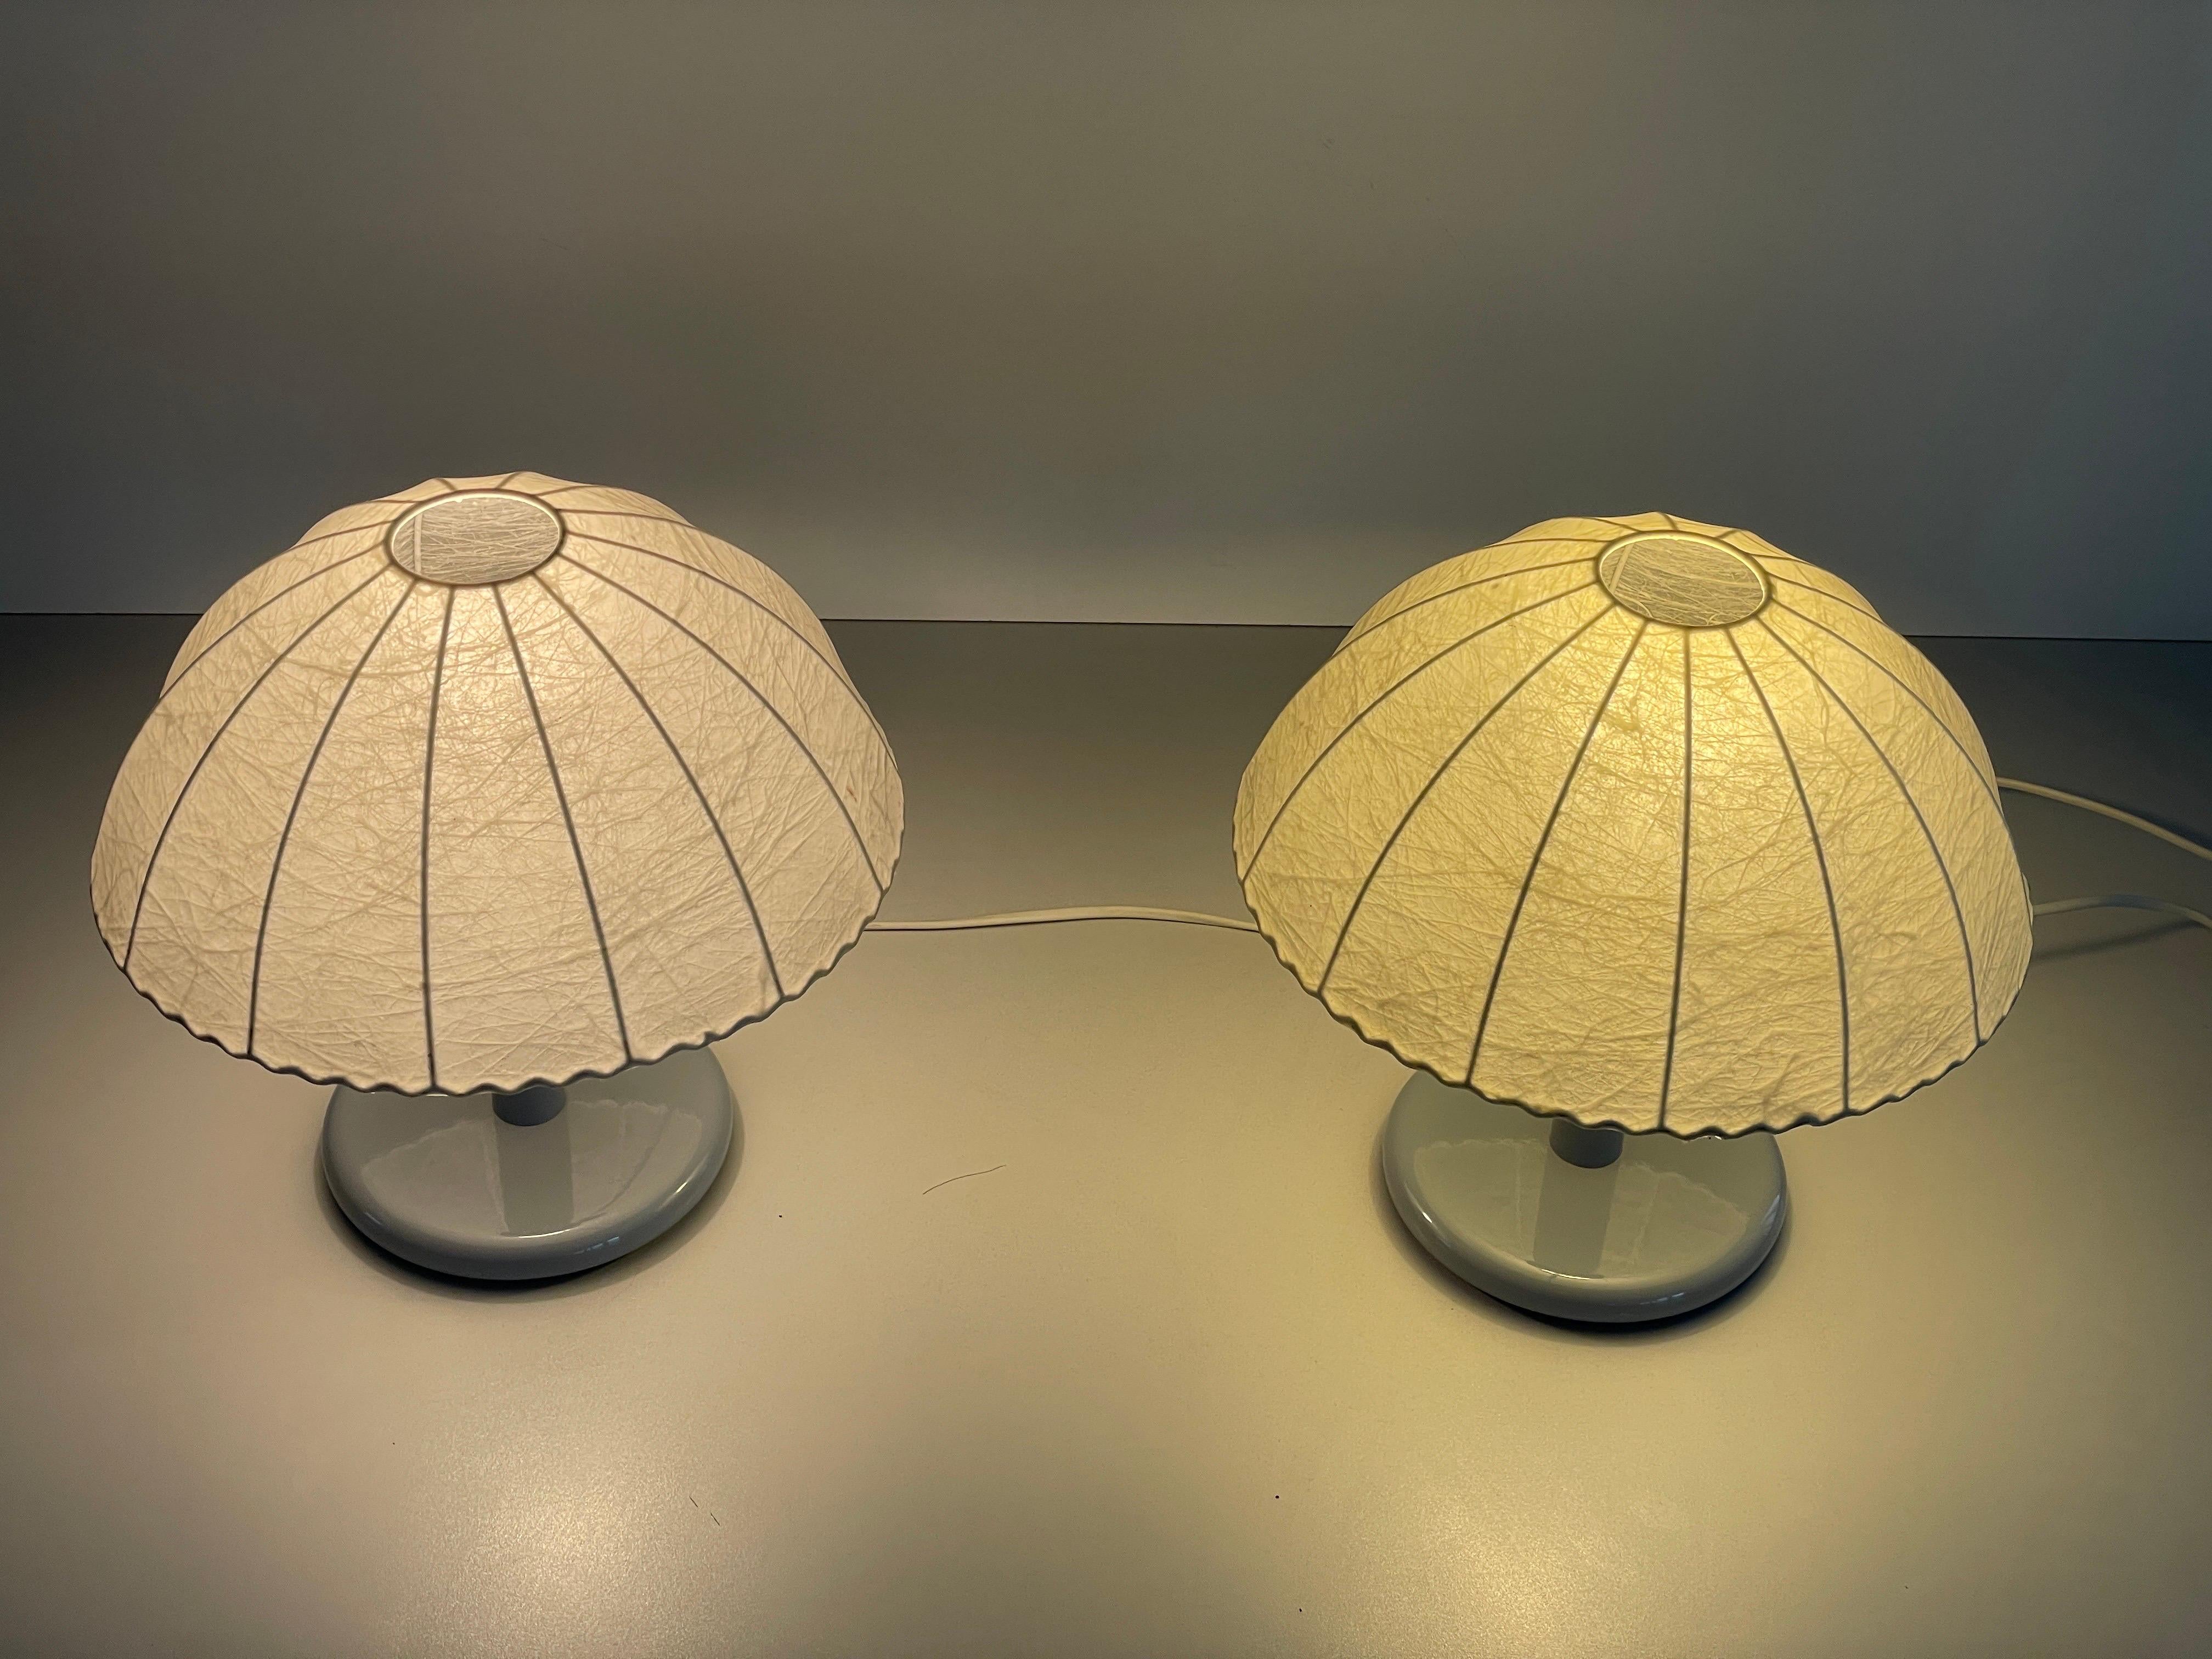 Pair of Cocoon Table Lamps with Grey Metal Base by GOLDKANT, 1960s, Germany For Sale 8